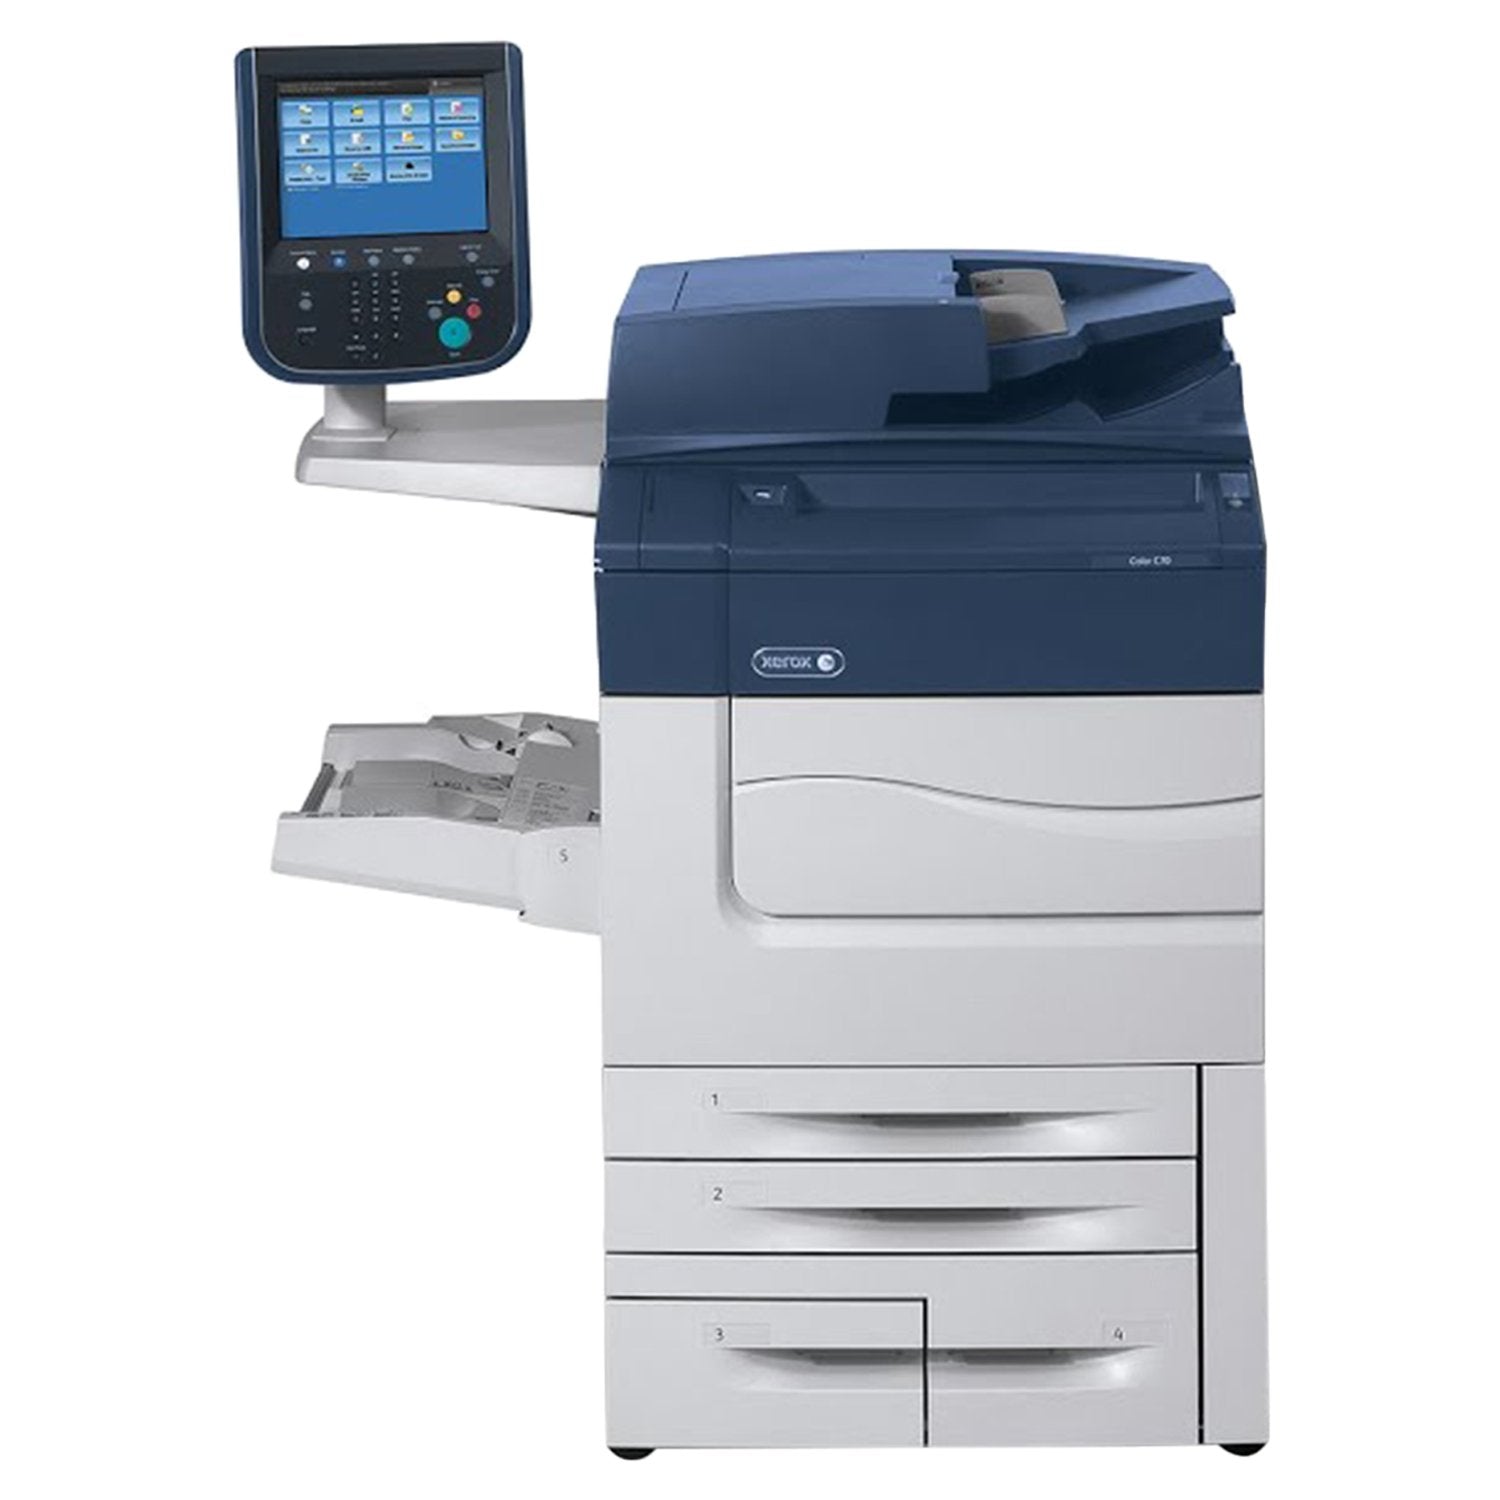 Absolute Toner $179/Month Xerox C70 Pro Office Color Multifunction Production Laser Printer | Color MFP With Support For 13 x 19.2 in. / SRA3 Printers/Copiers